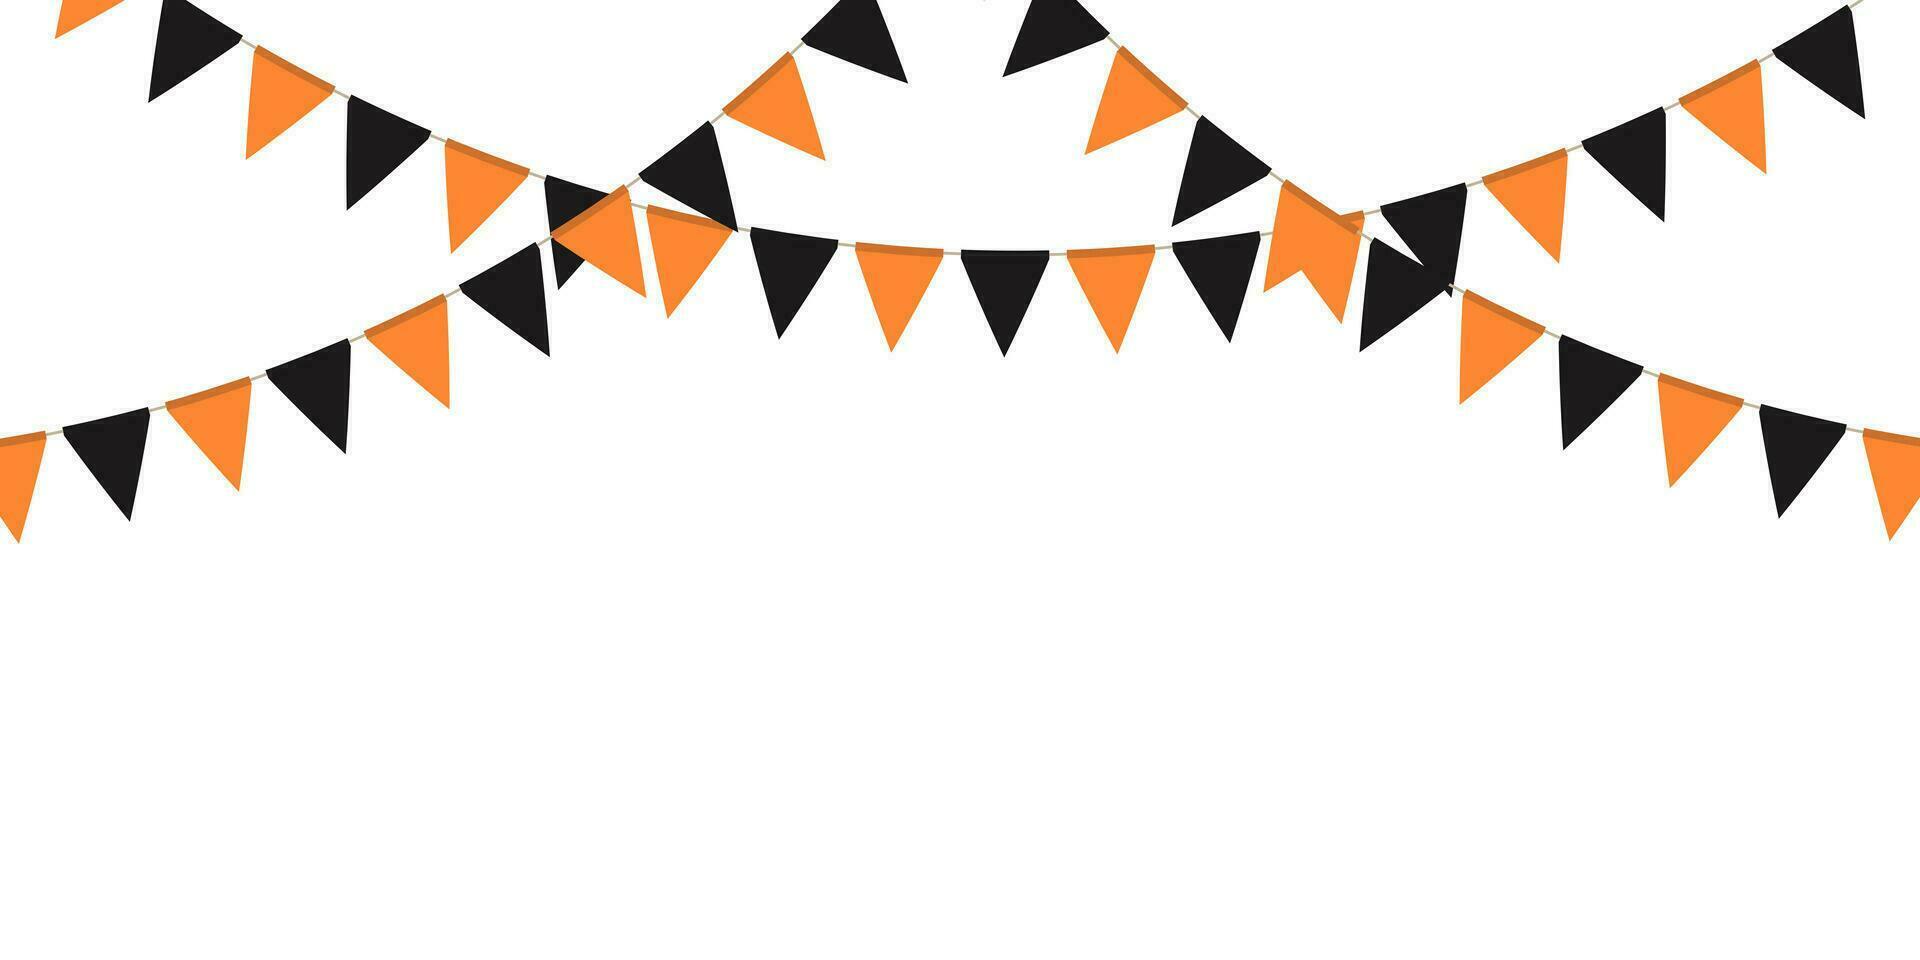 Black and orange flag garland. Triangle pennants chain. Party decoration. Celebration flags for decor vector